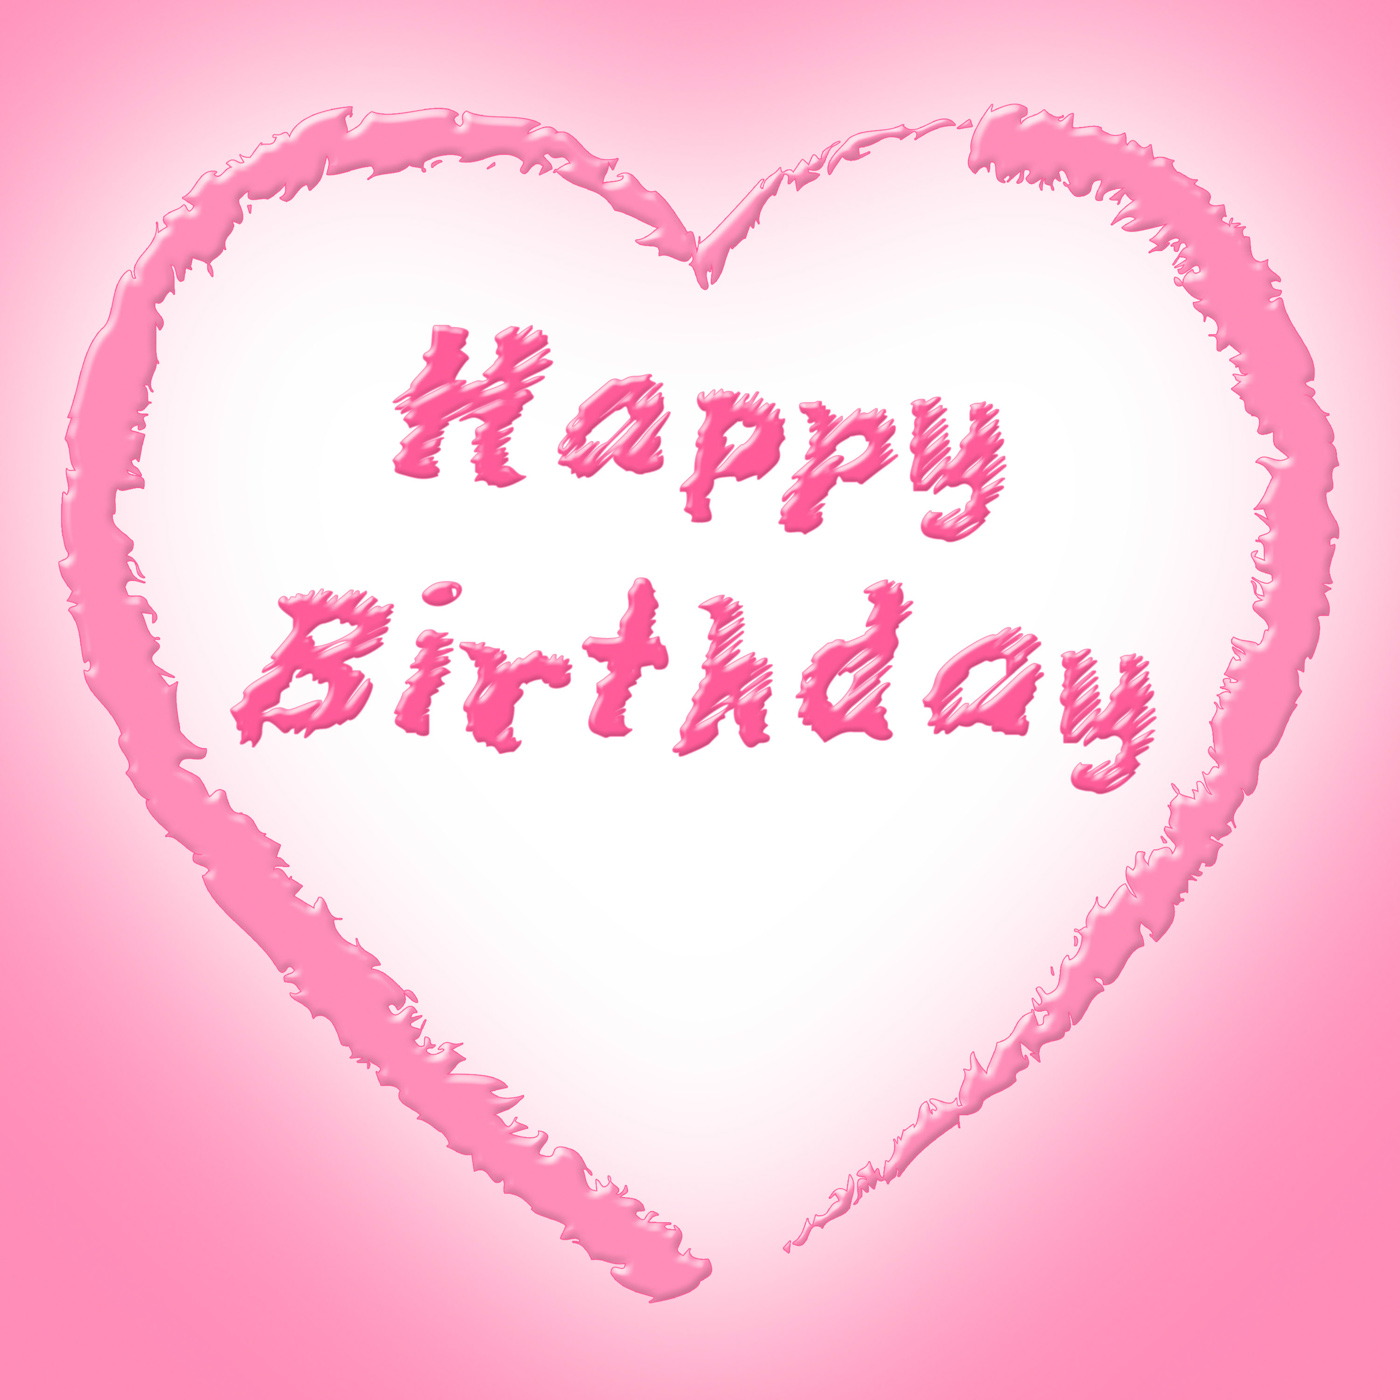 Free photo: Happy Birthday Means Congratulations Greetings And ...